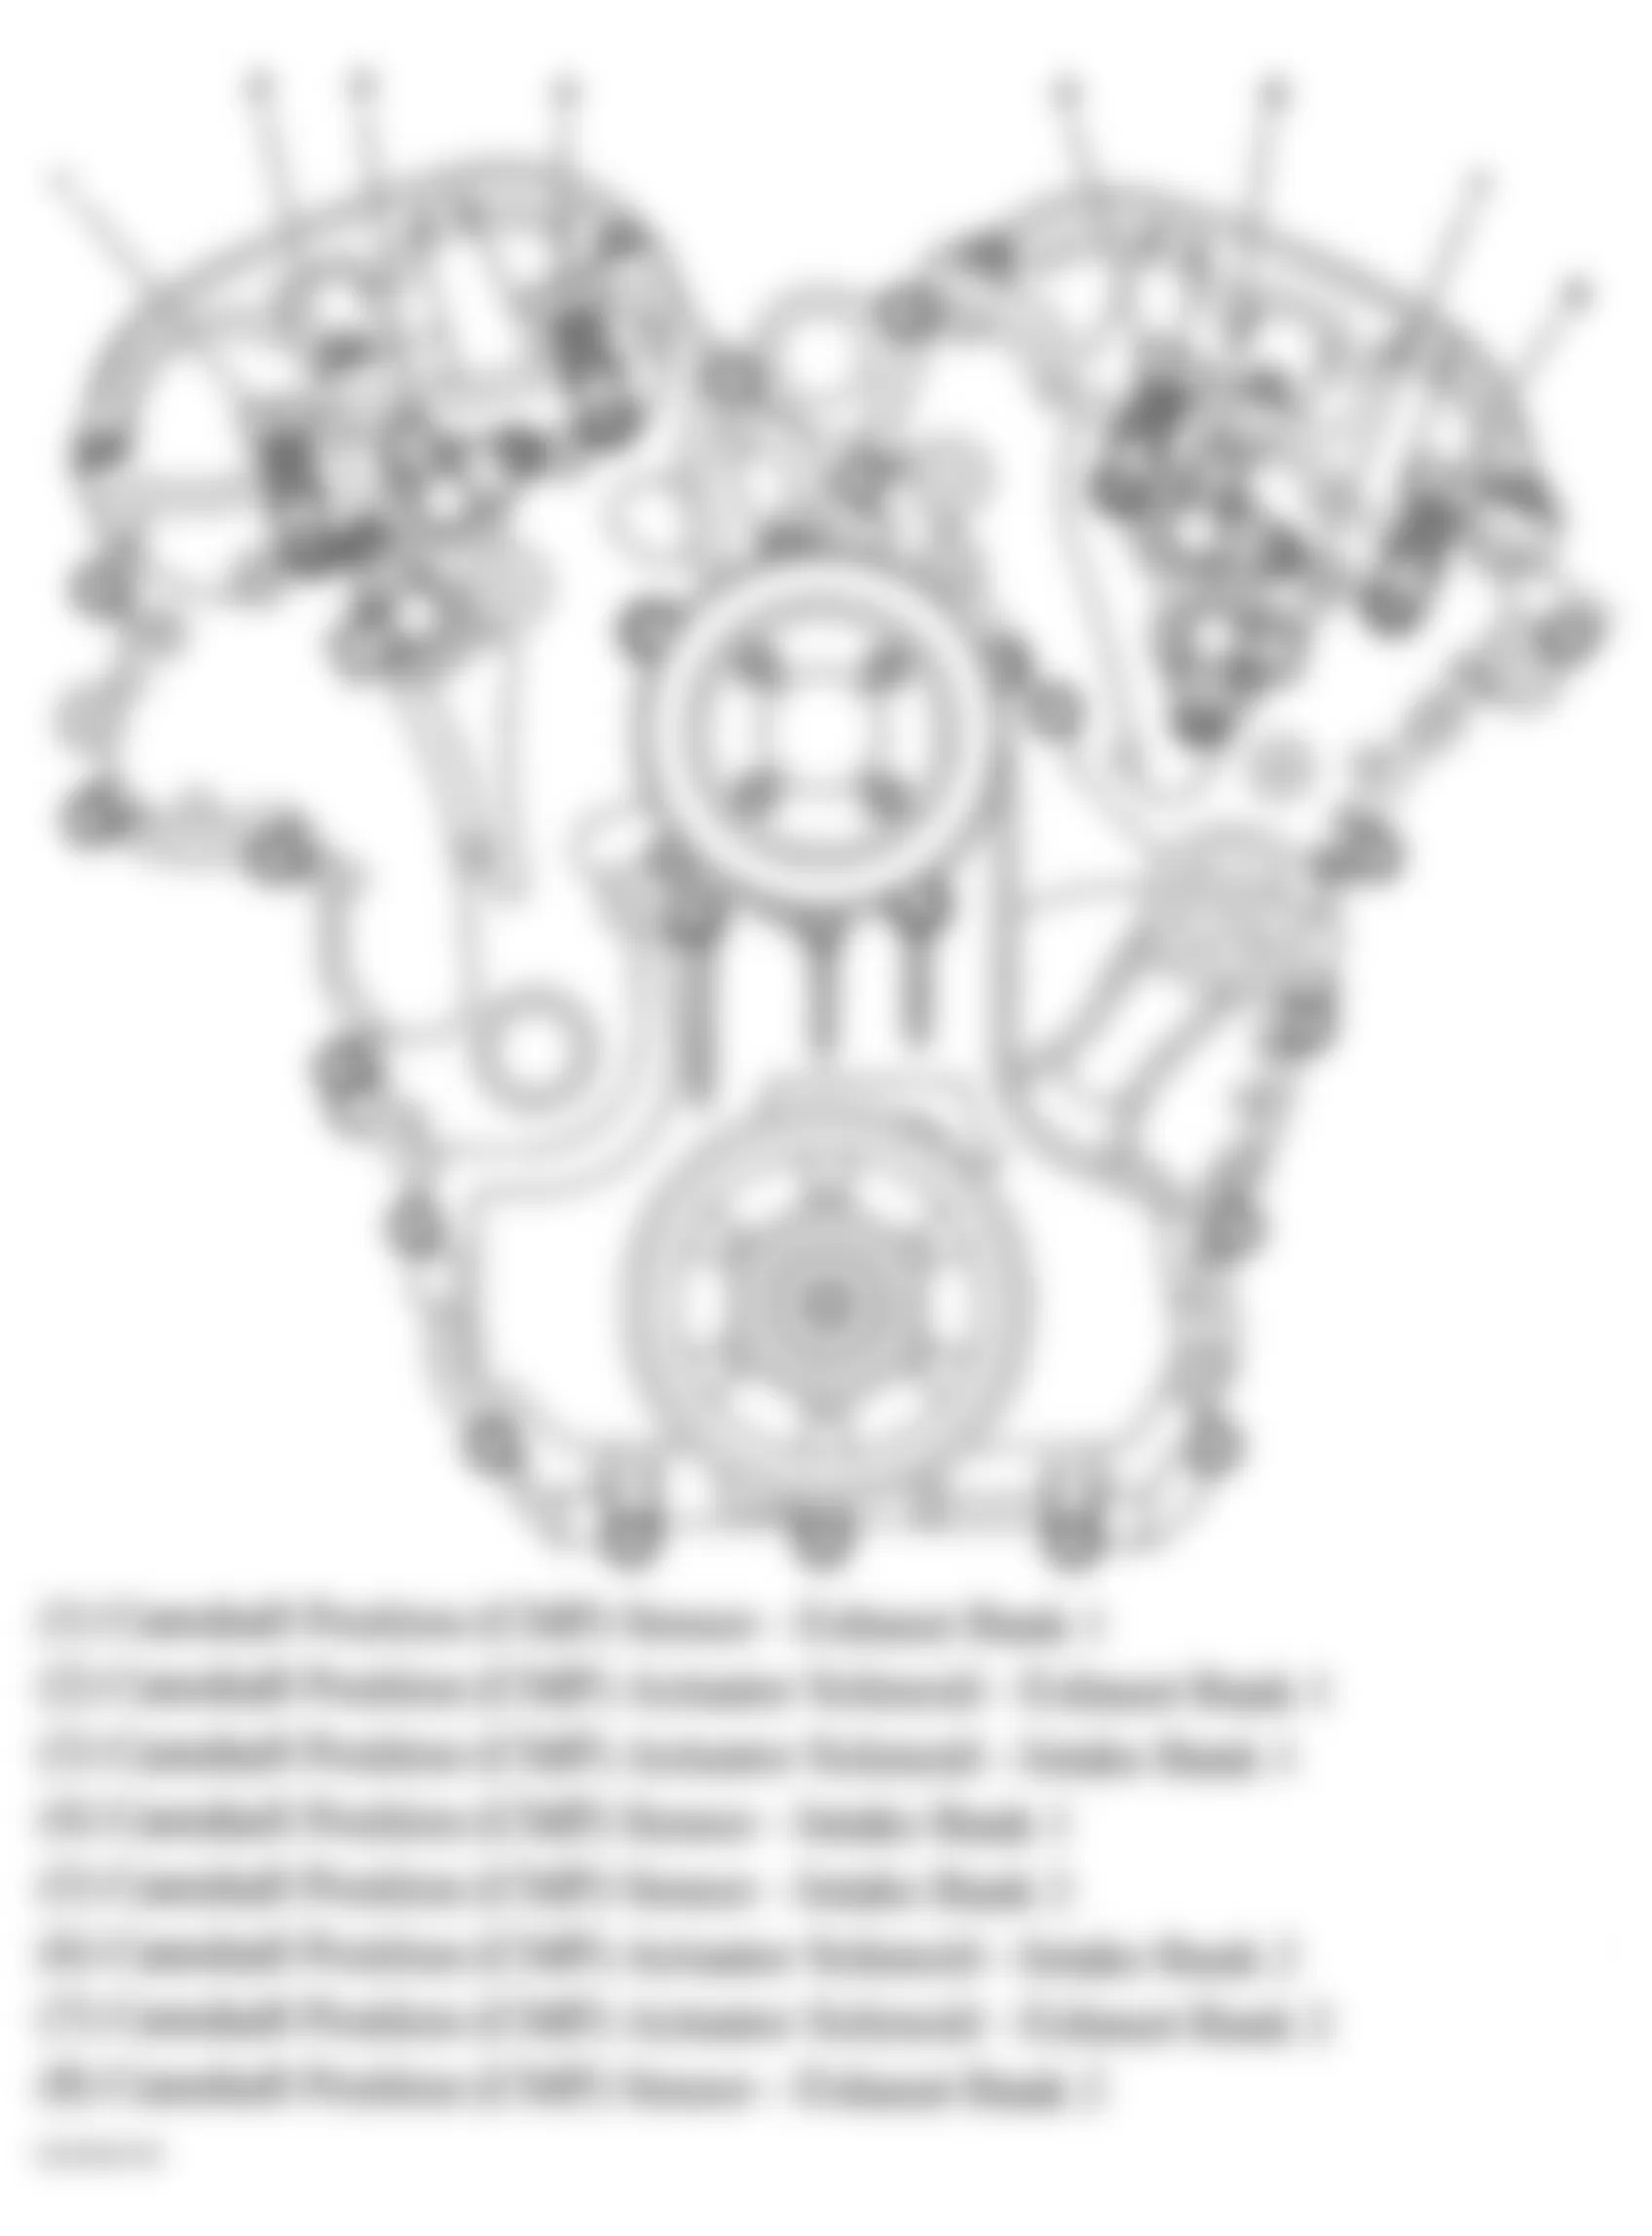 Buick LaCrosse CX 2005 - Component Locations -  Front Of Engine (3.6L)